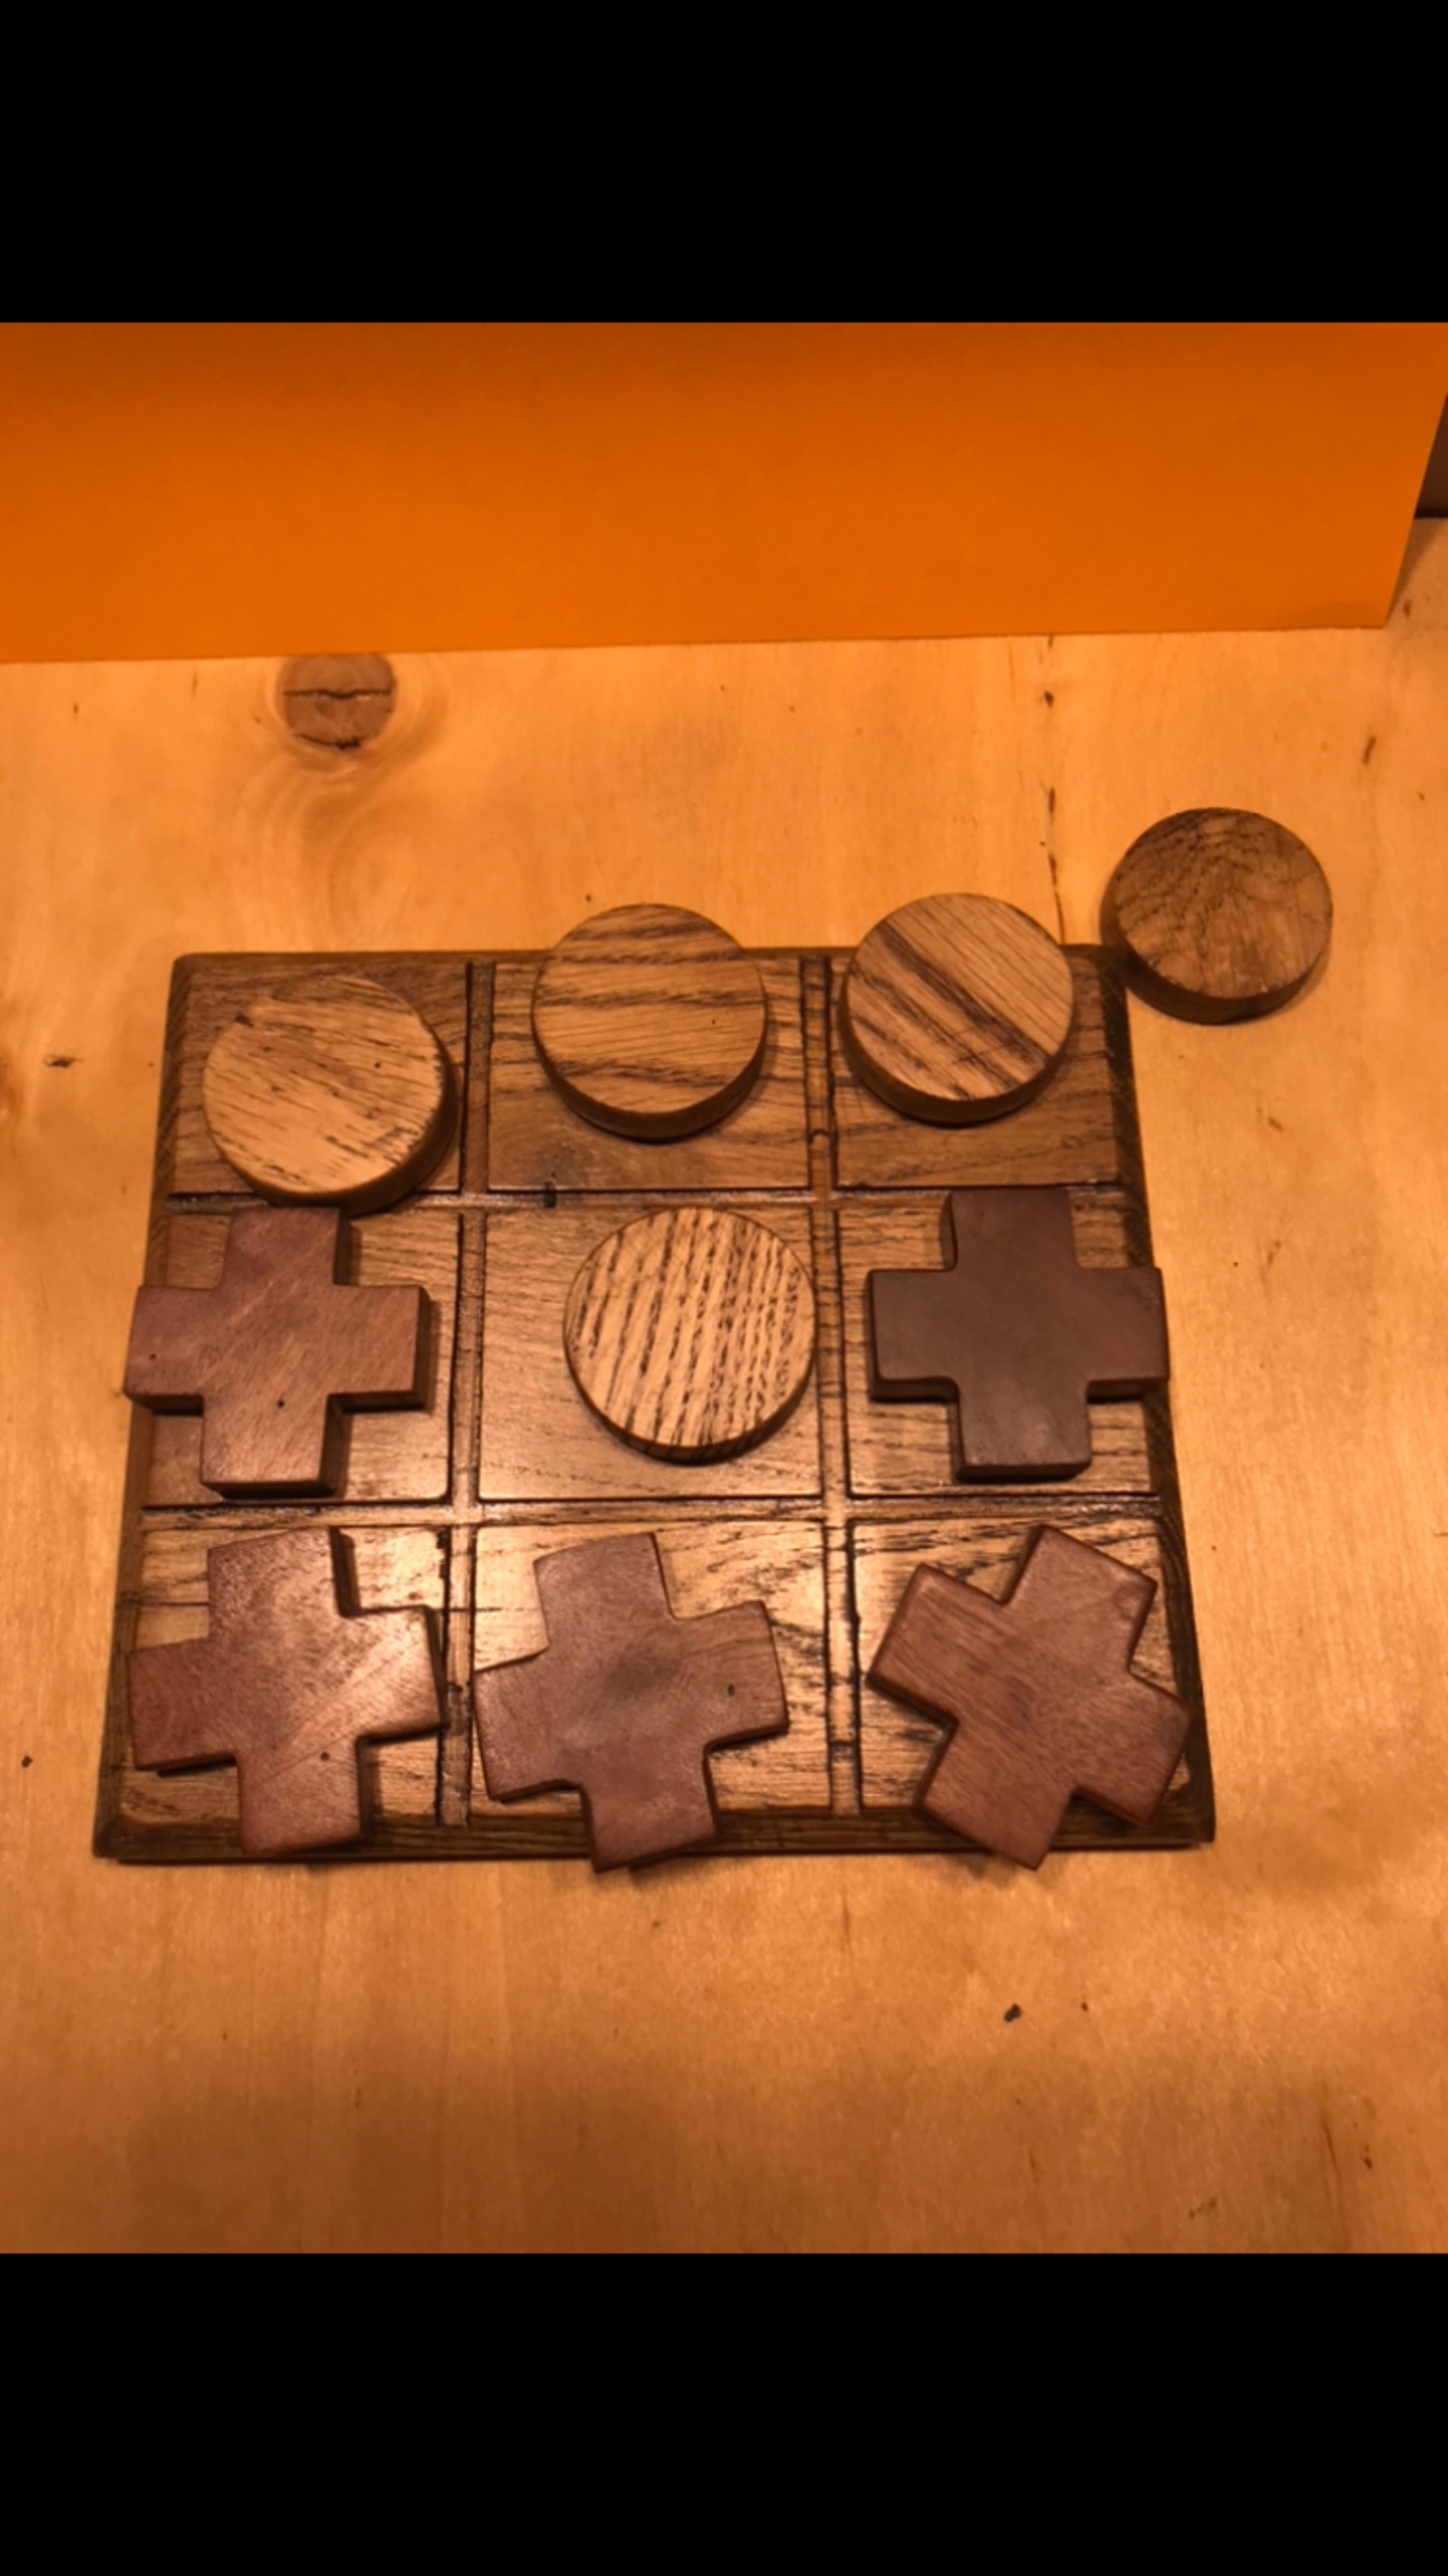 Board game tic-tac-toe In New Condition For Sale In Нұр-Сұлтан, KZ